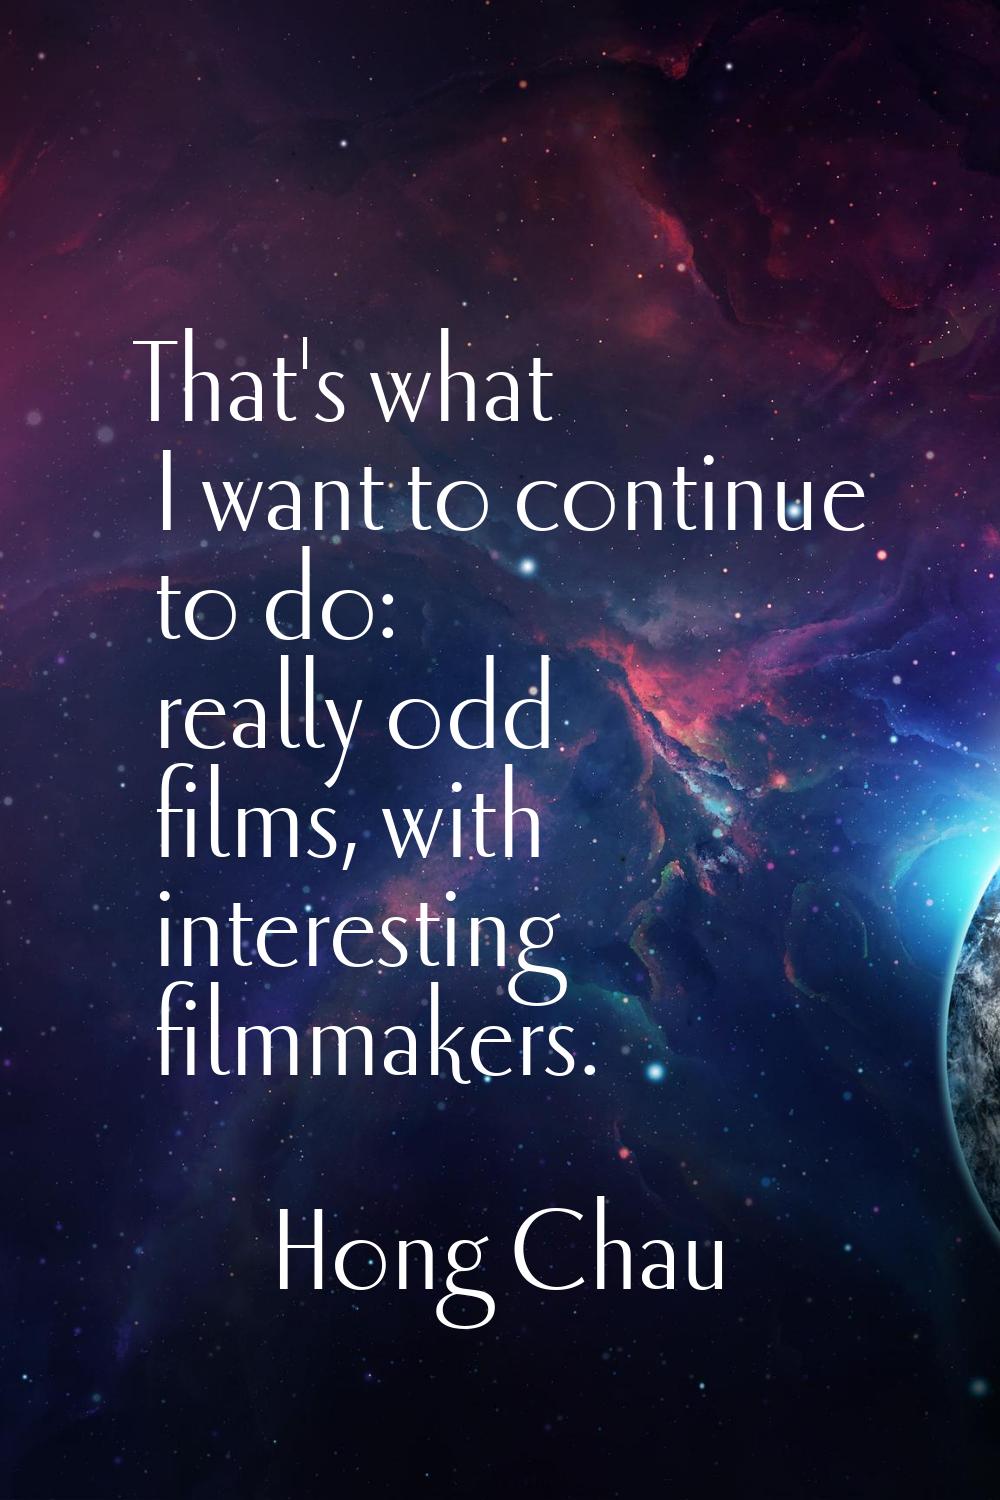 That's what I want to continue to do: really odd films, with interesting filmmakers.